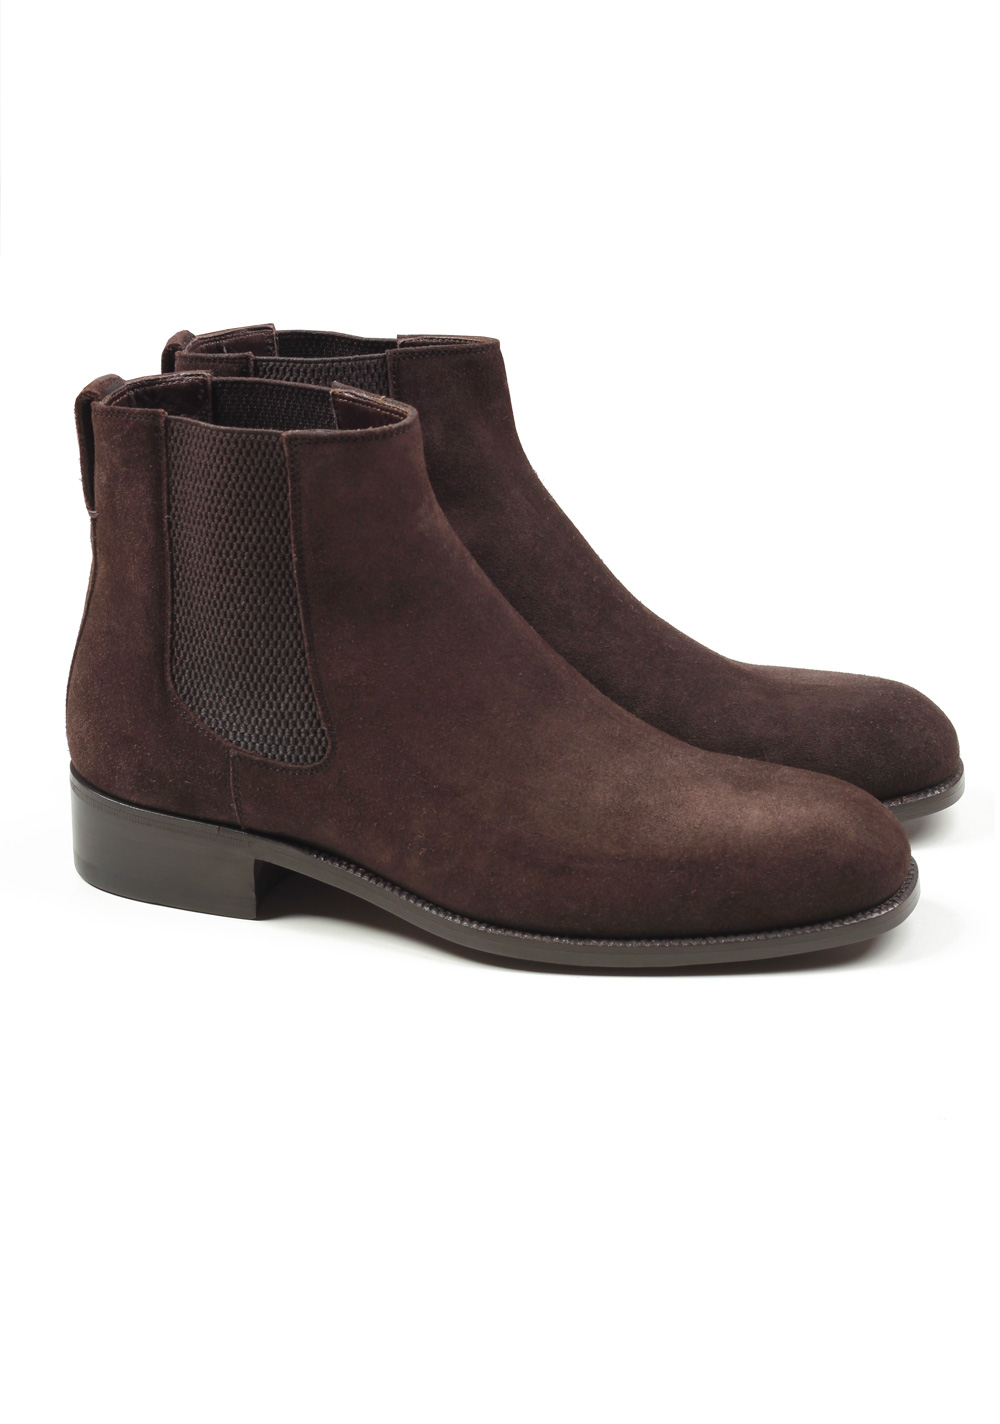 TOM FORD Wilson Brown Suede Chelsea Boots Shoes Size 8,5 UK / 9,5 U.S. | Costume Limité